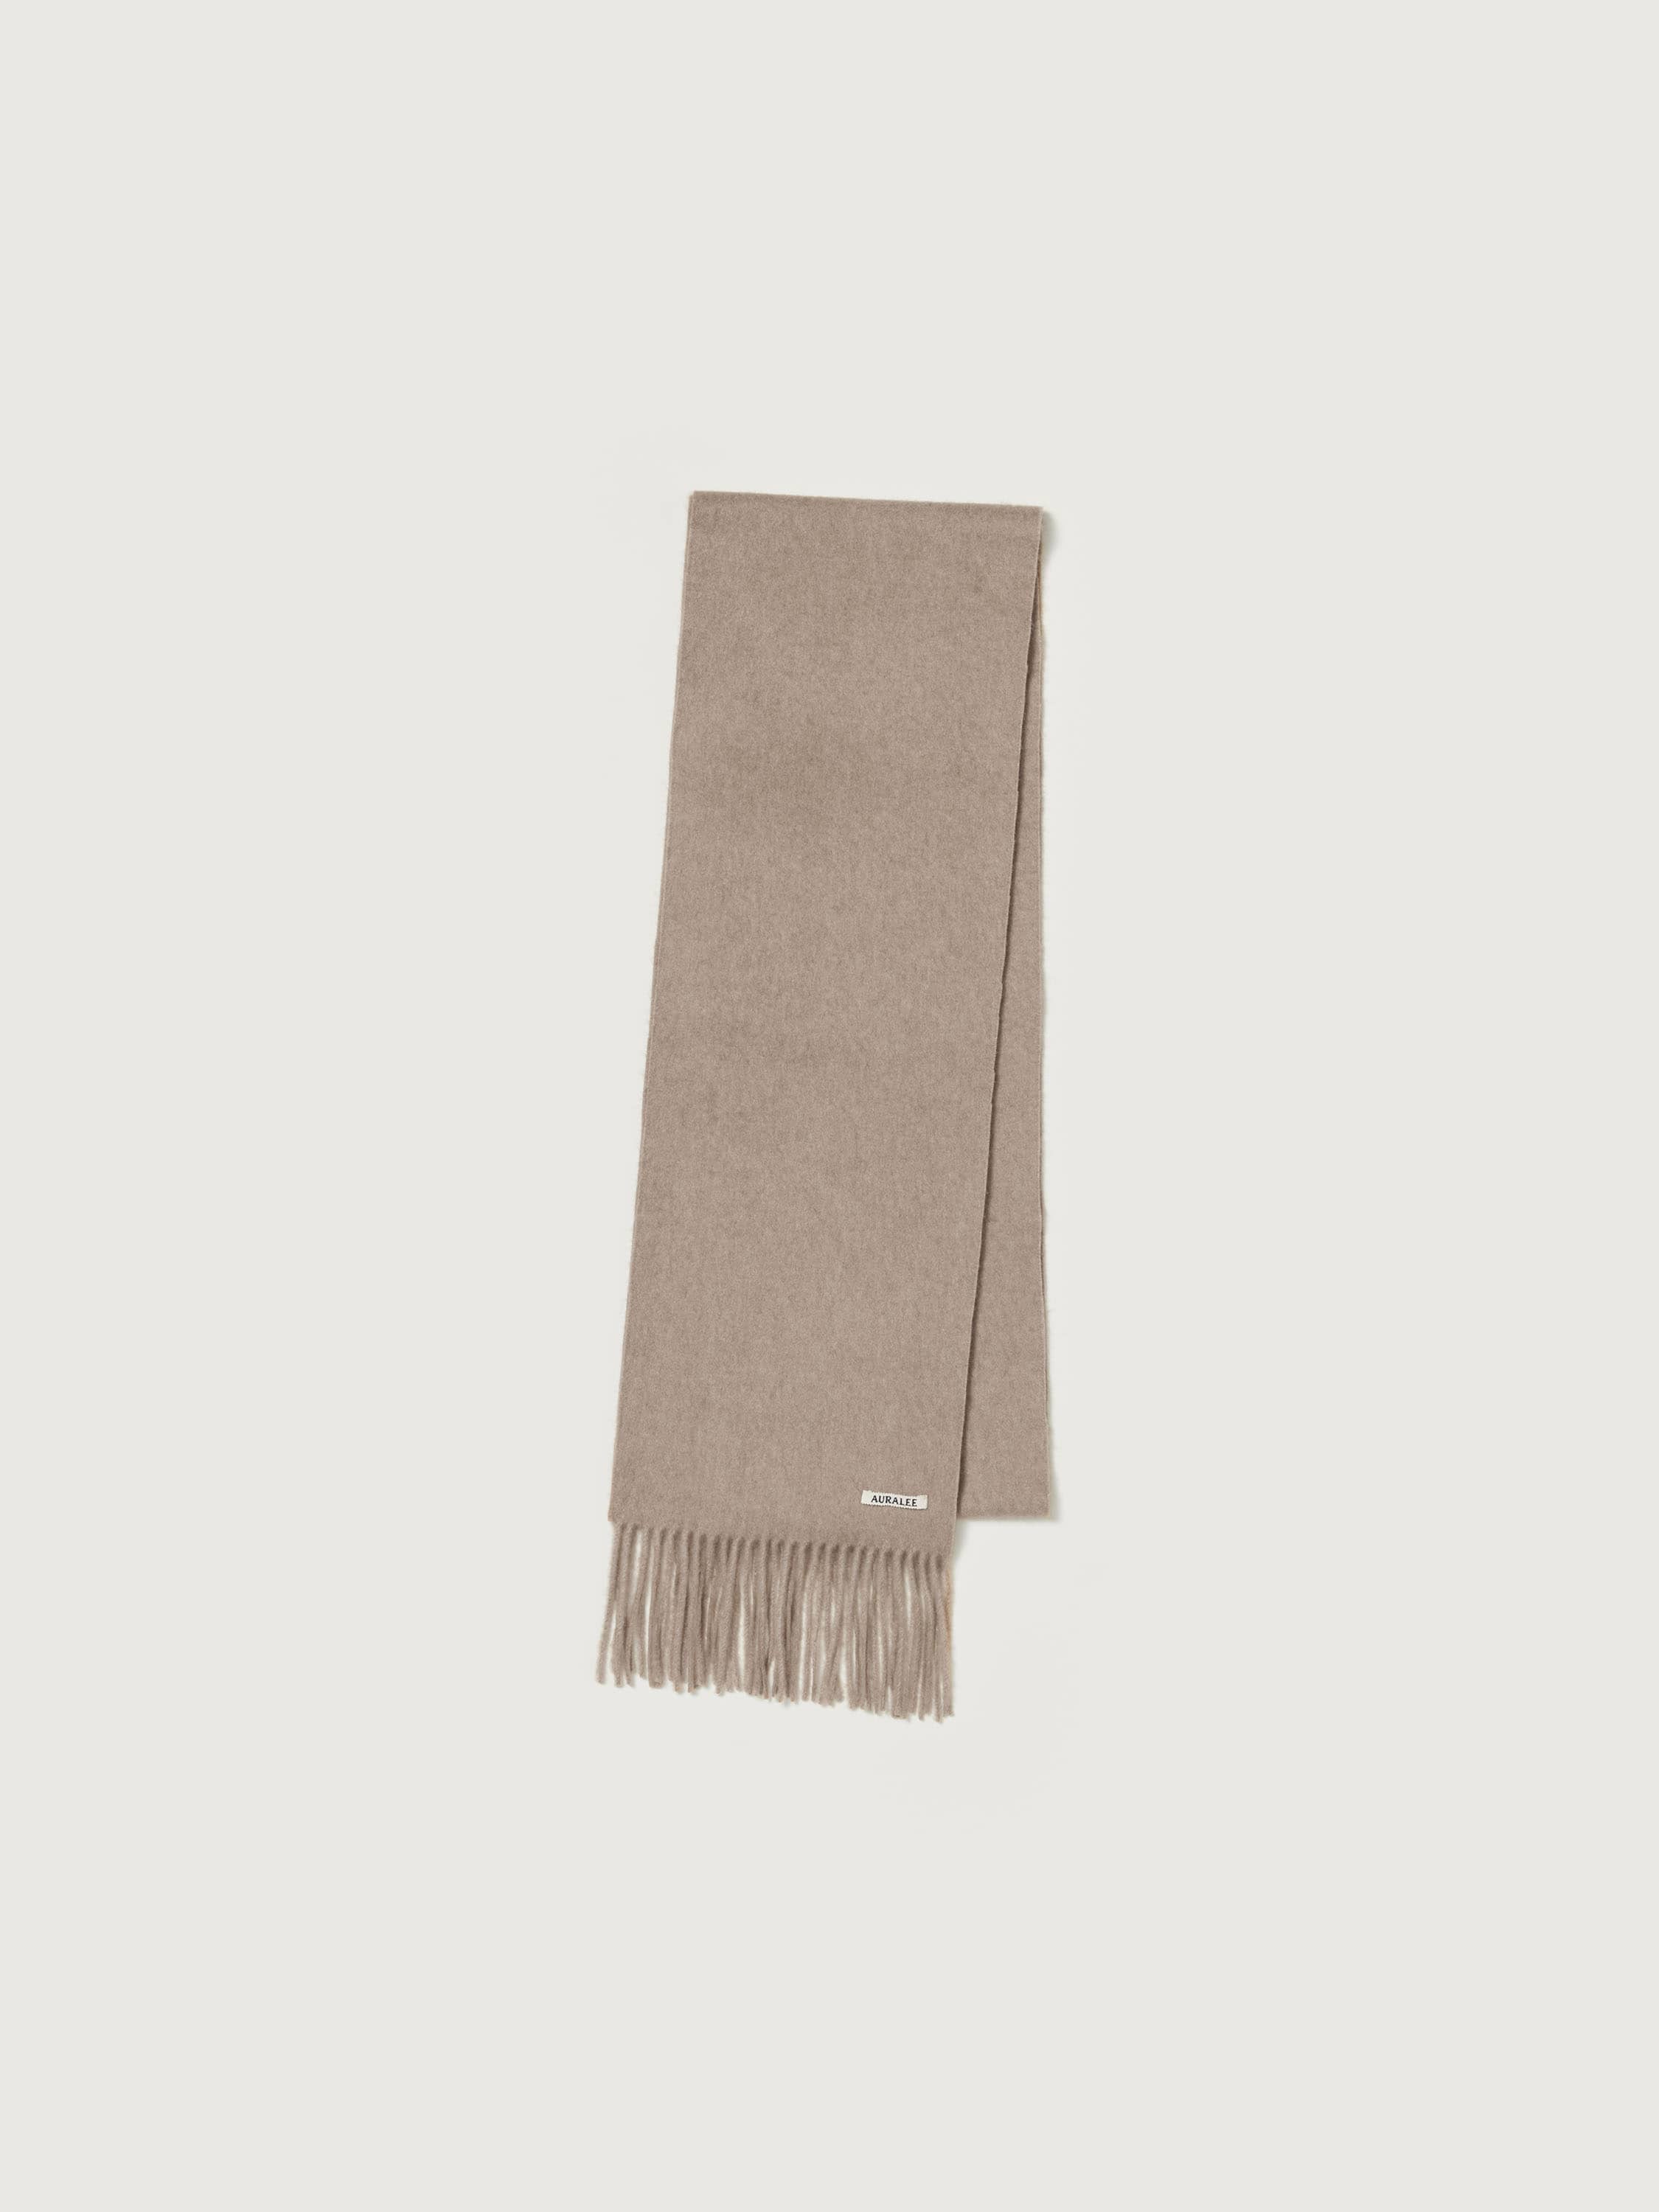 BABY CASHMERE LONG STOLE 詳細画像 NATURAL BROWN 1